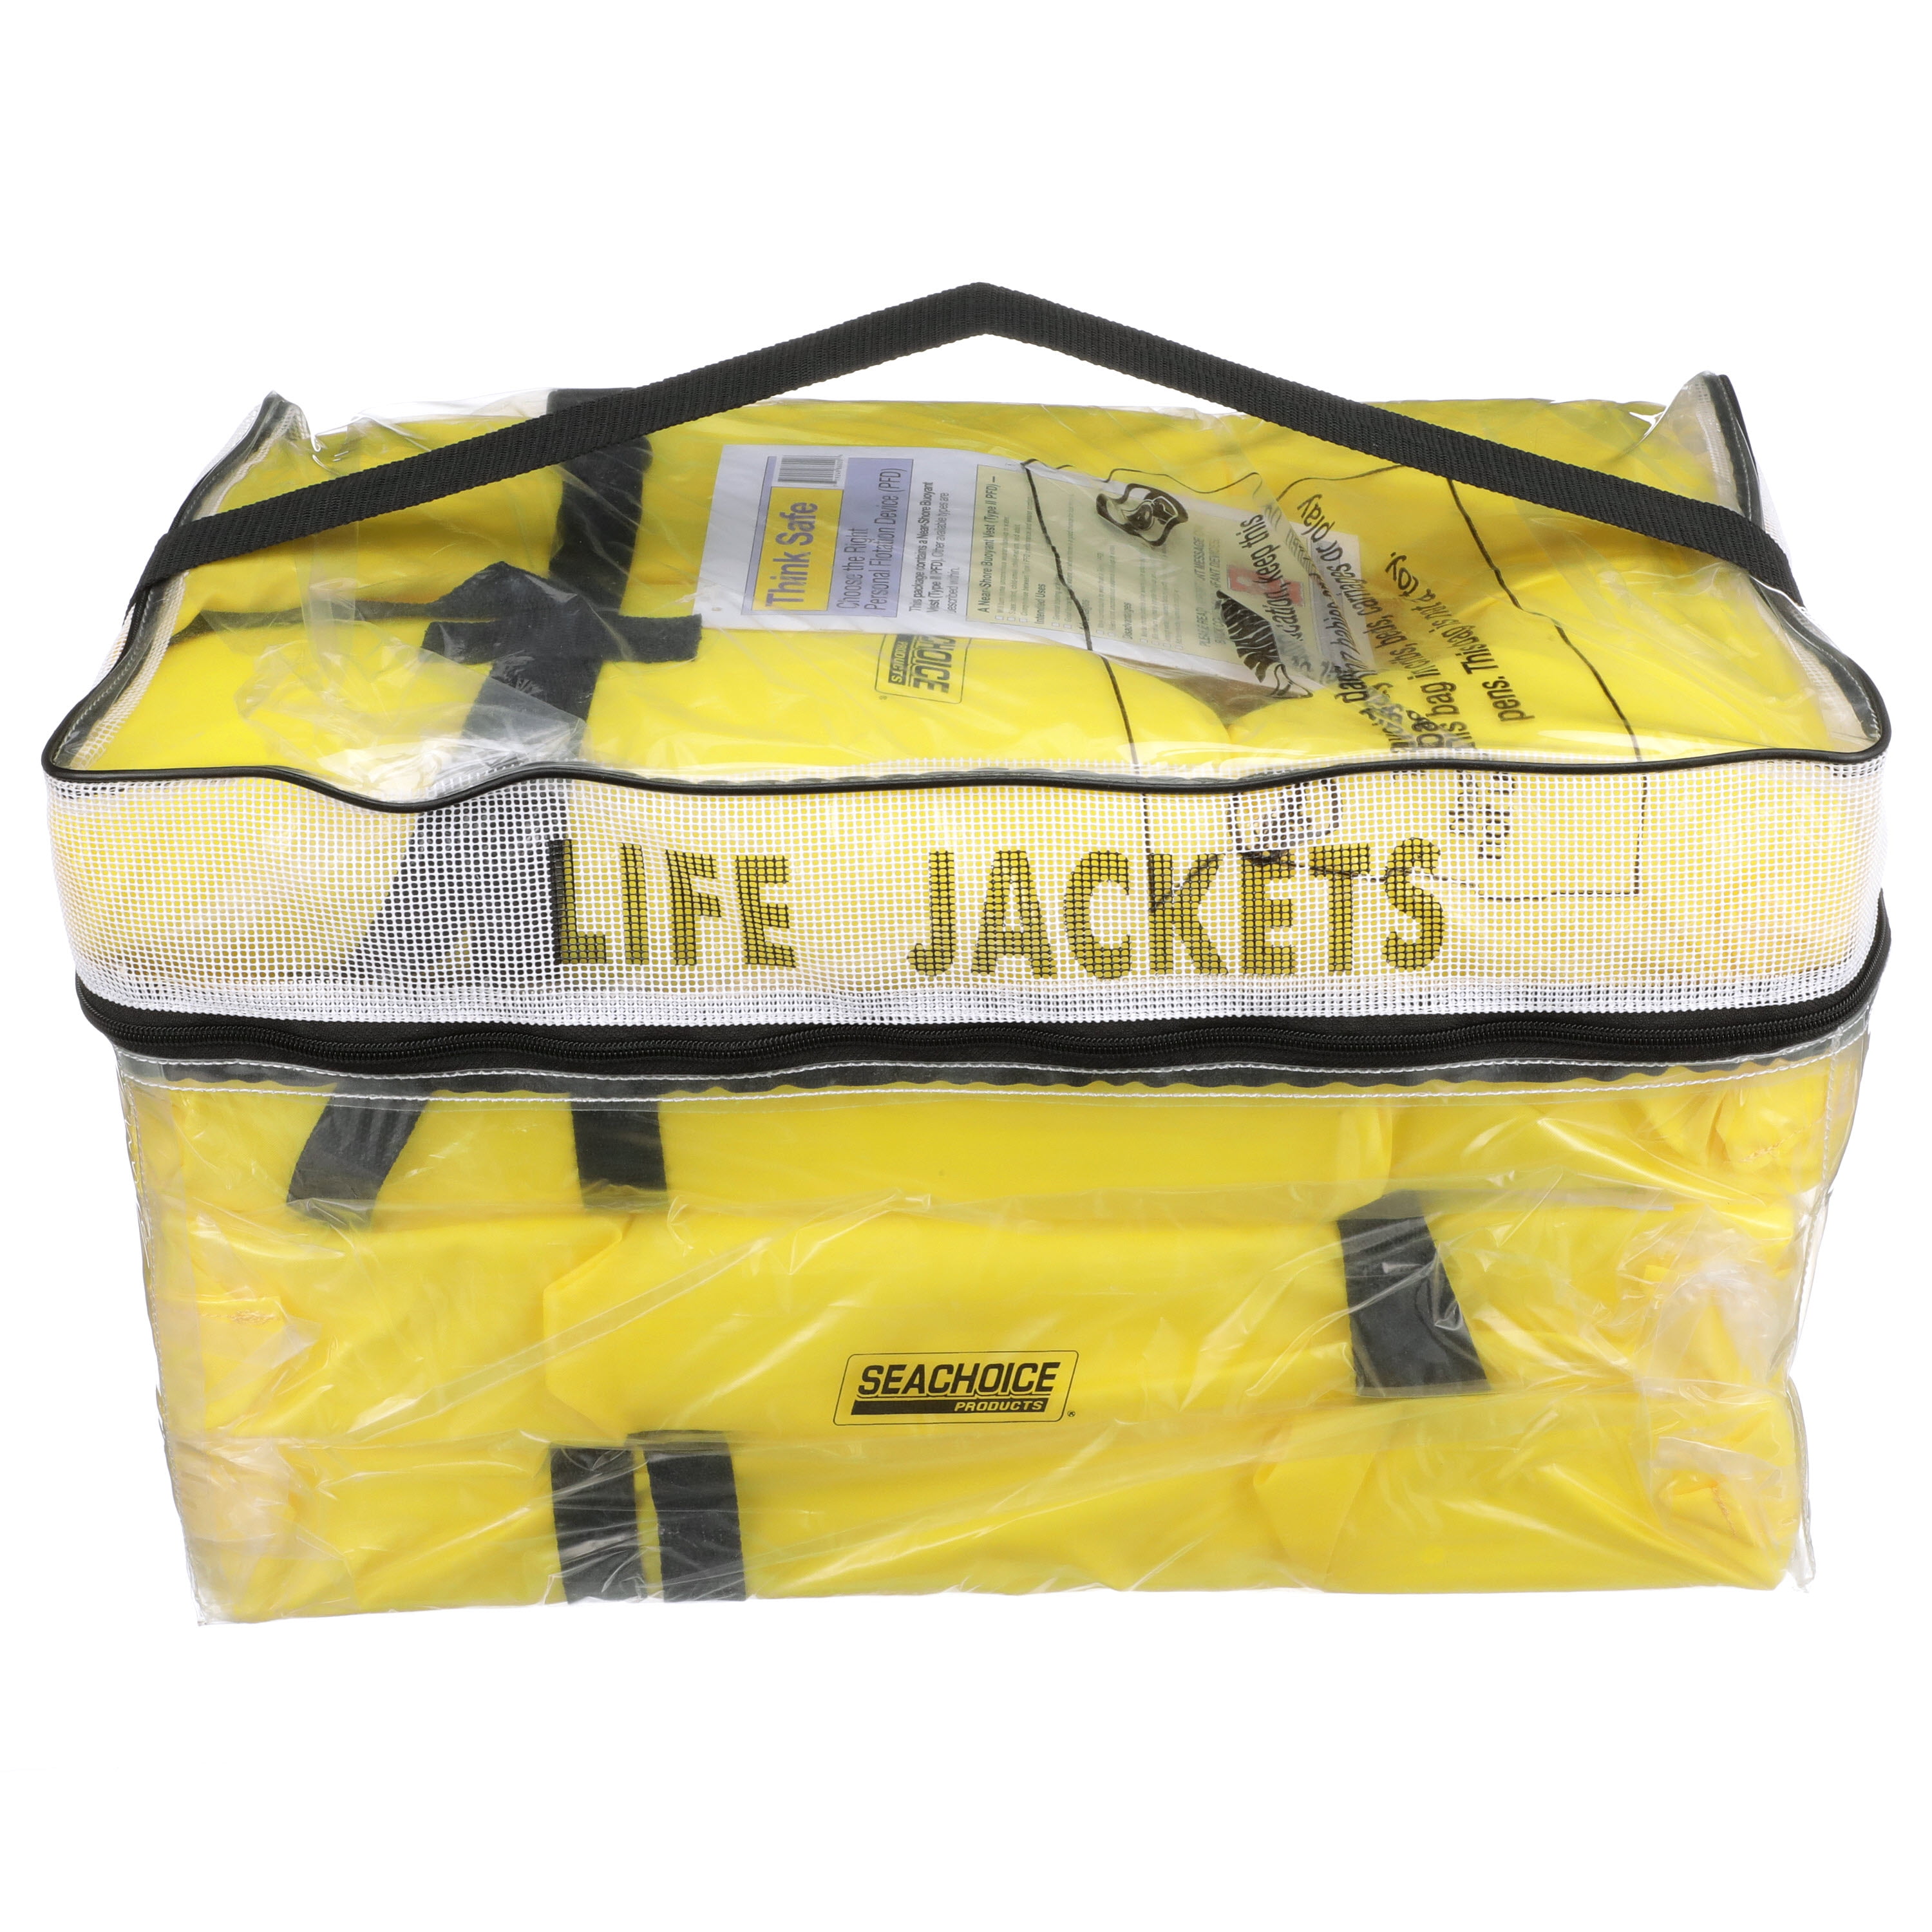 Seachoice Life Vest 4-Pack w/ Bag, Type II Personal Flotation Device,  Yellow, Adult